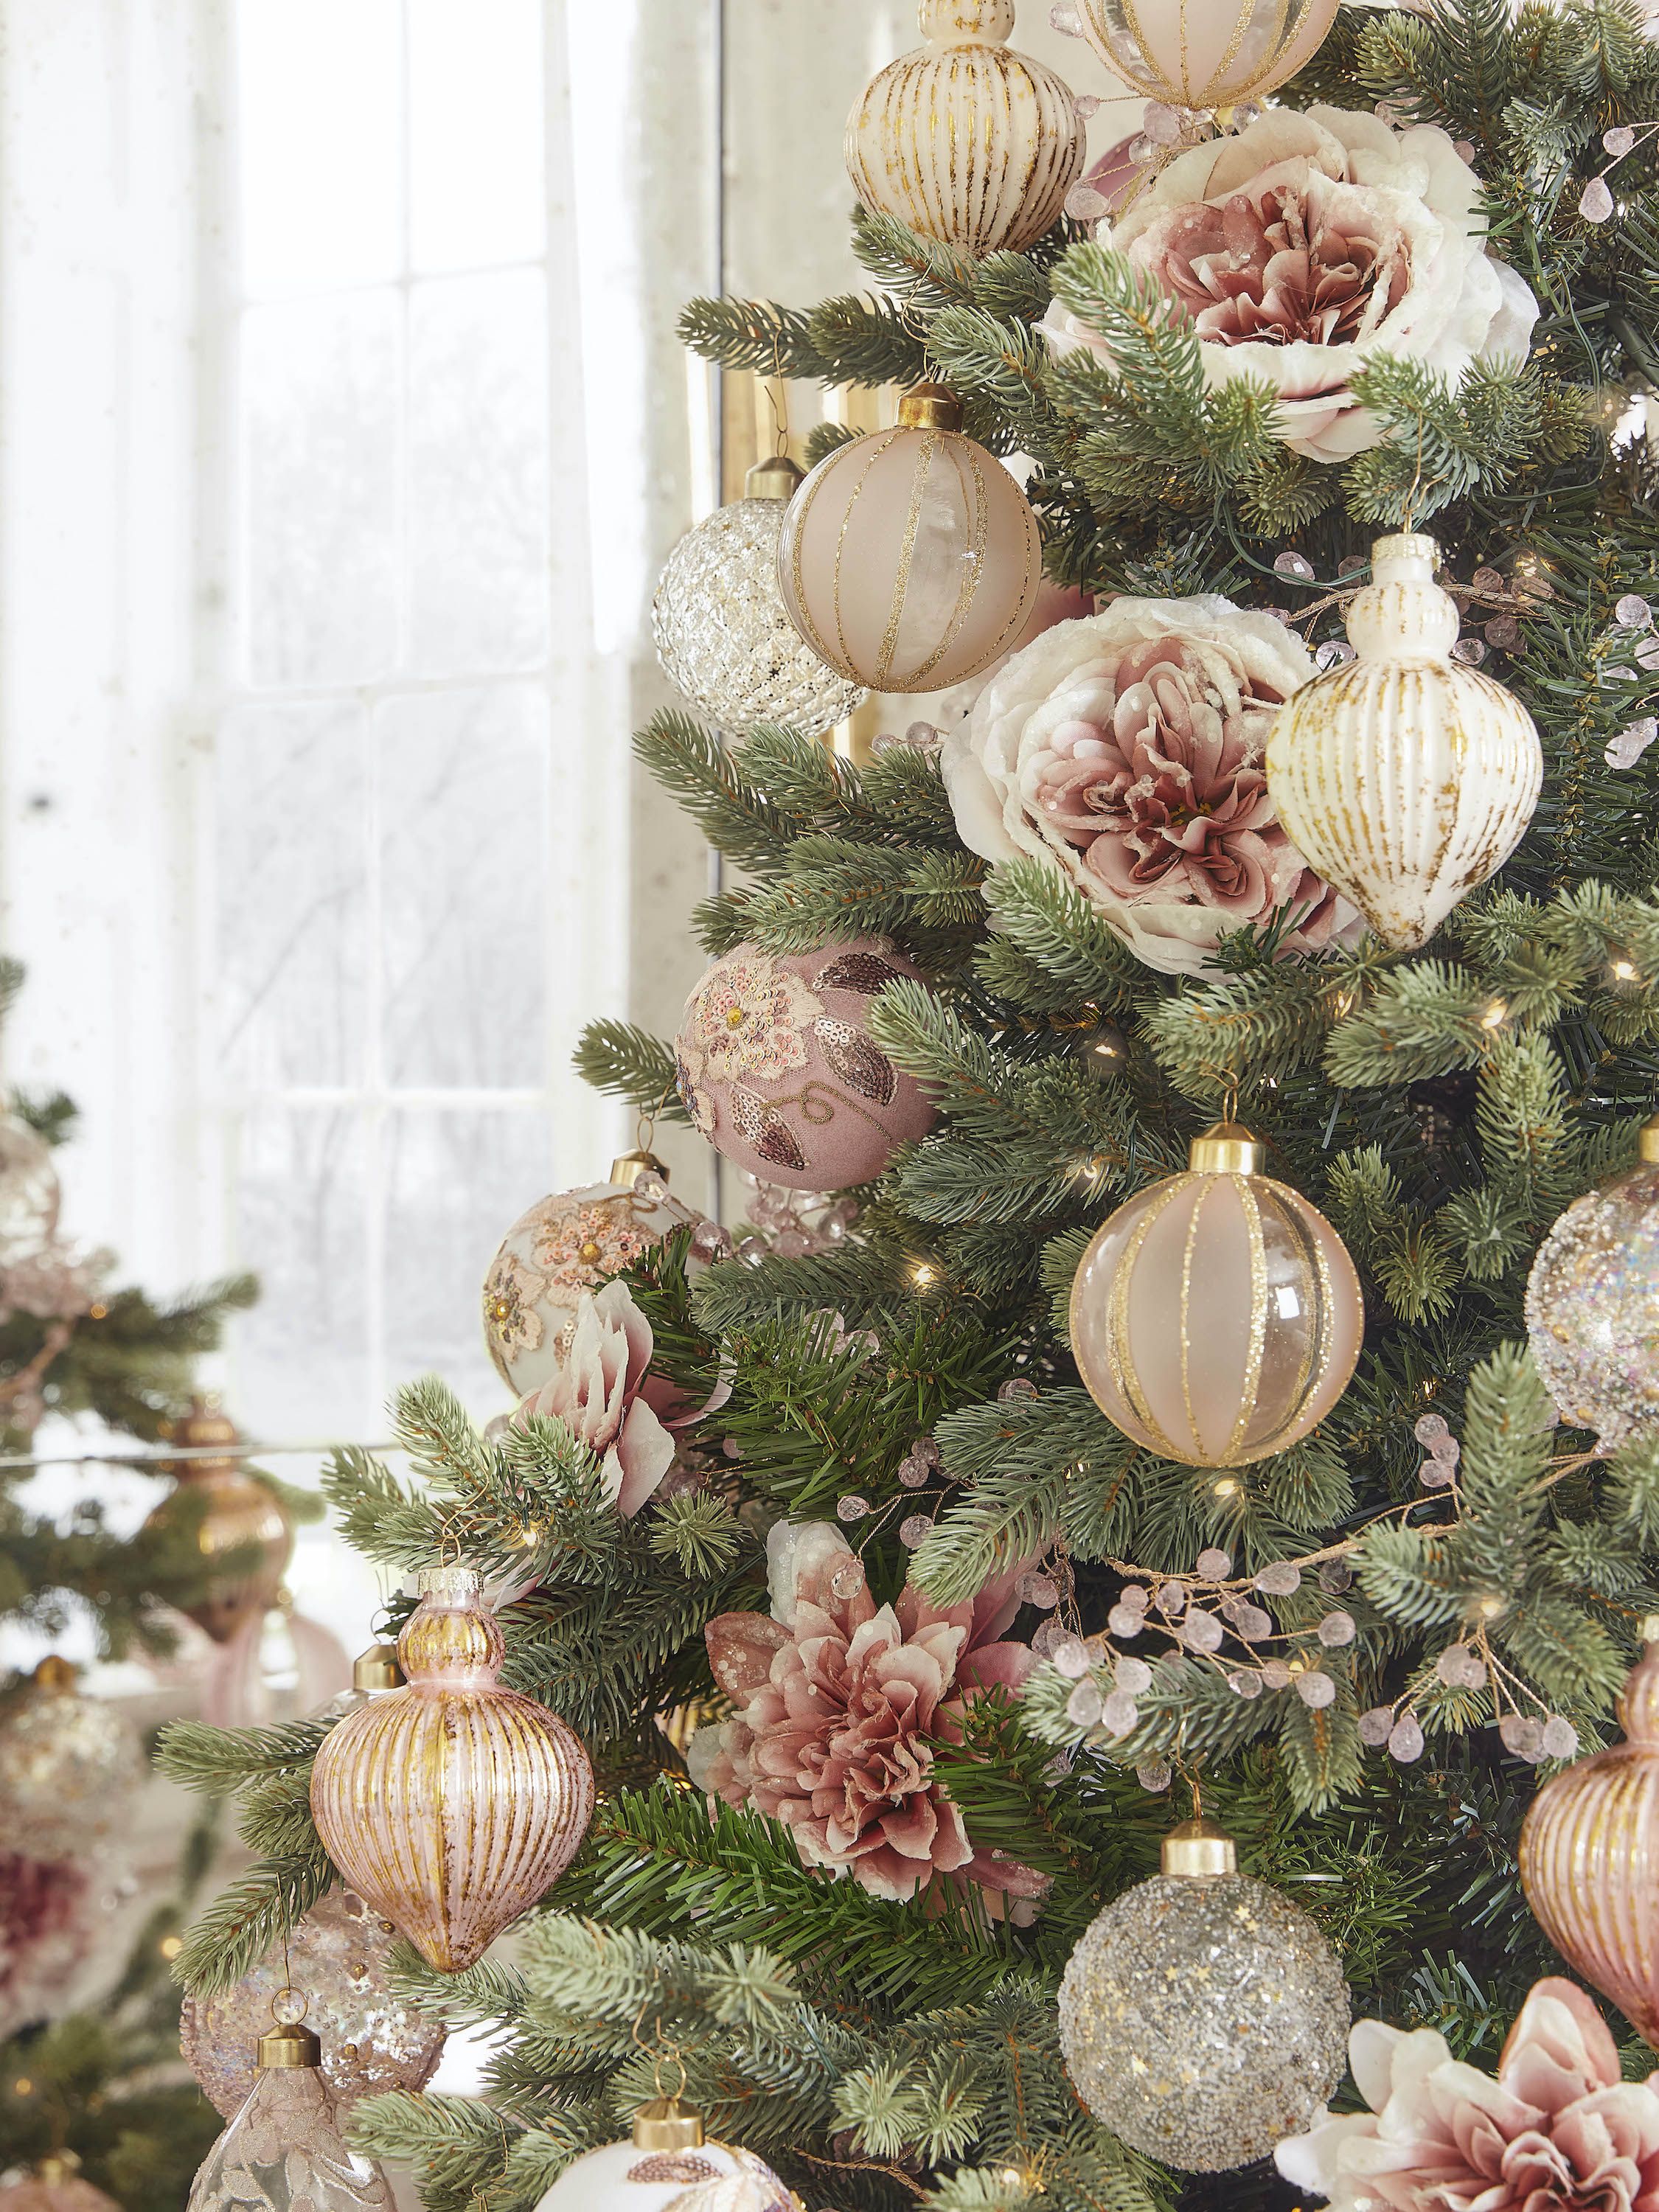 Christmas tree trends – our pick of the 20 best looks this holiday season